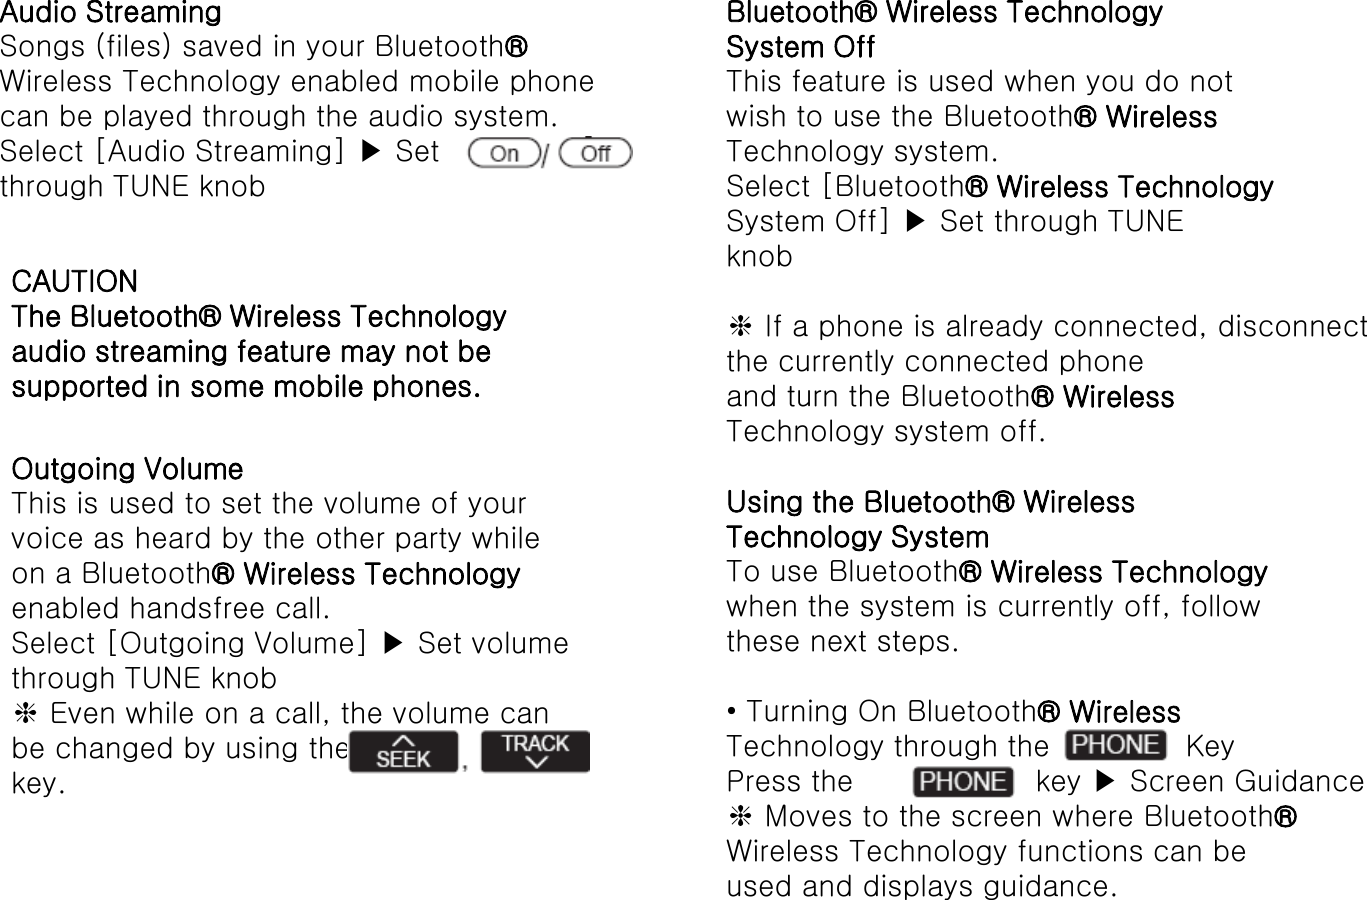 Audio Streaming Songs (files) saved in your Bluetooth® Wireless Technology enabled mobile phone can be played through the audio system. Select [Audio Streaming] ▶ Set through TUNE knob CAUTION The Bluetooth® Wireless Technology audio streaming feature may not be supported in some mobile phones. Outgoing Volume This is used to set the volume of your voice as heard by the other party while on a Bluetooth® Wireless Technology enabled handsfree call. Select [Outgoing Volume] ▶ Set volume through TUNE knob ❈ Even while on a call, the volume can be changed by using the key. Bluetooth® Wireless Technology System Off This feature is used when you do not wish to use the Bluetooth® Wireless Technology system. Select [Bluetooth® Wireless Technology System Off] ▶ Set through TUNE knob  ❈ If a phone is already connected, disconnect the currently connected phone and turn the Bluetooth® Wireless Technology system off.  Using the Bluetooth® Wireless Technology System To use Bluetooth® Wireless Technology when the system is currently off, follow these next steps.  • Turning On Bluetooth® Wireless Technology through the   Key Press the     key ▶ Screen Guidance ❈ Moves to the screen where Bluetooth® Wireless Technology functions can be used and displays guidance. 